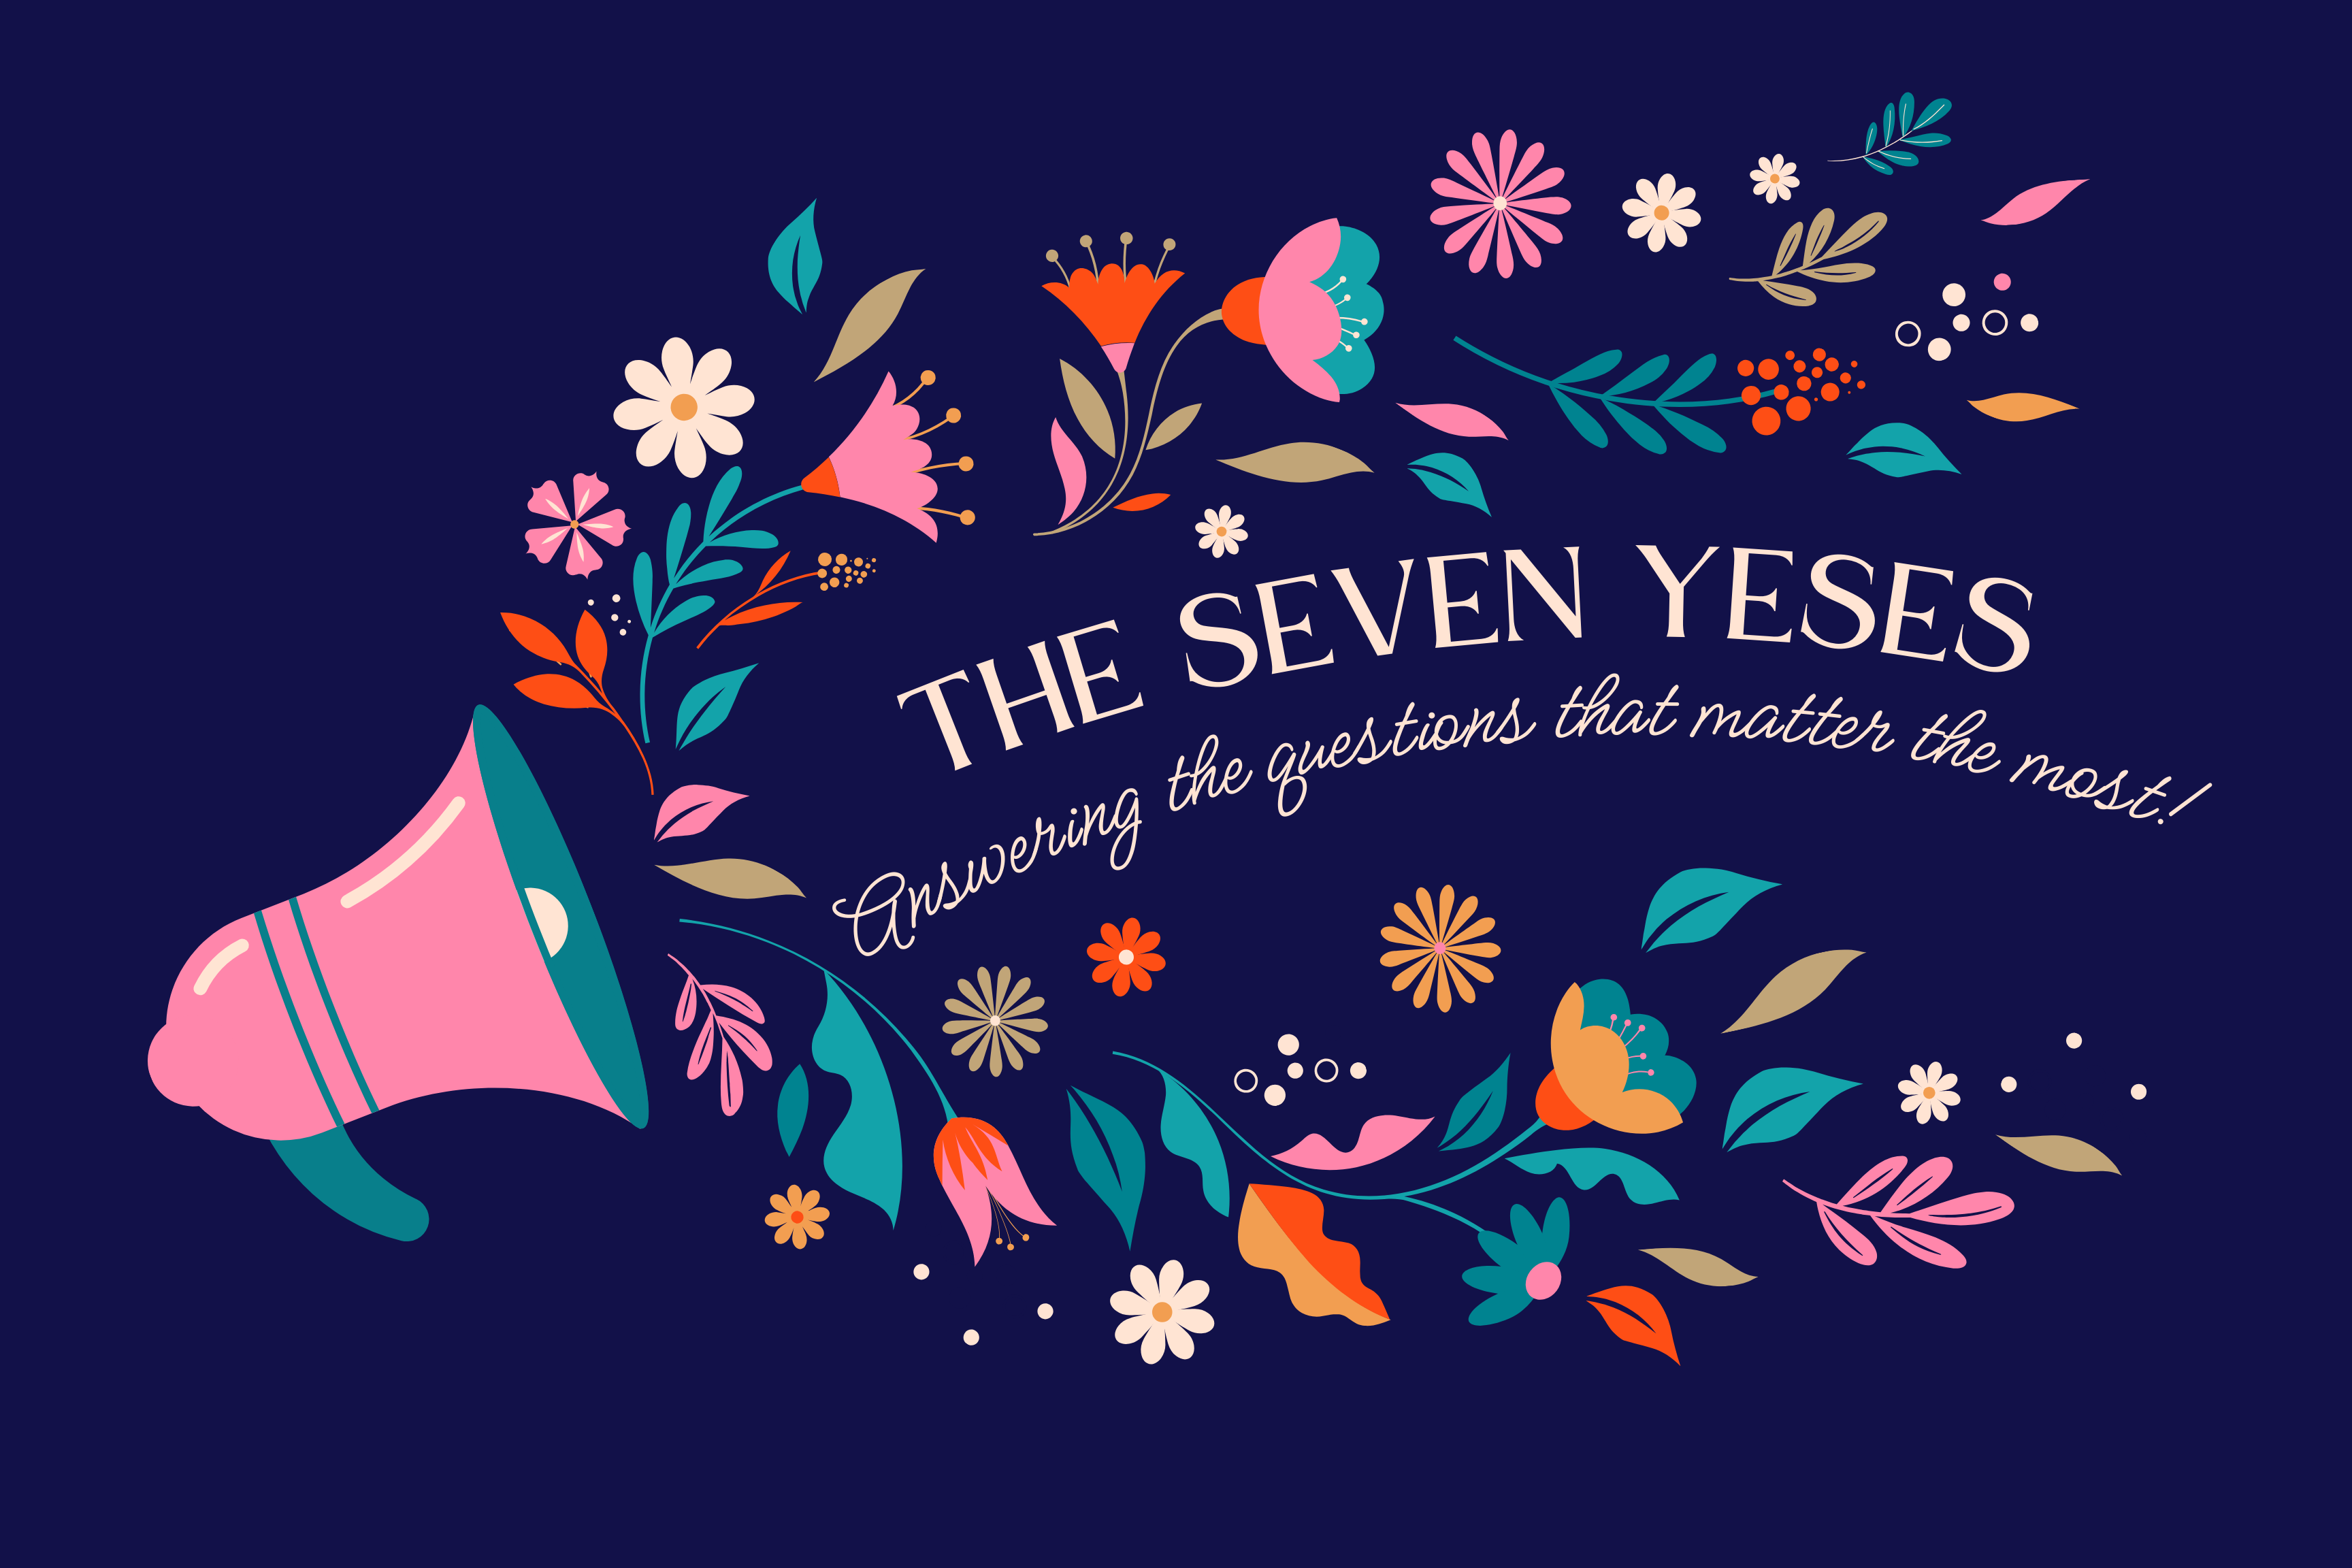 Image: The SEVEN Yeses